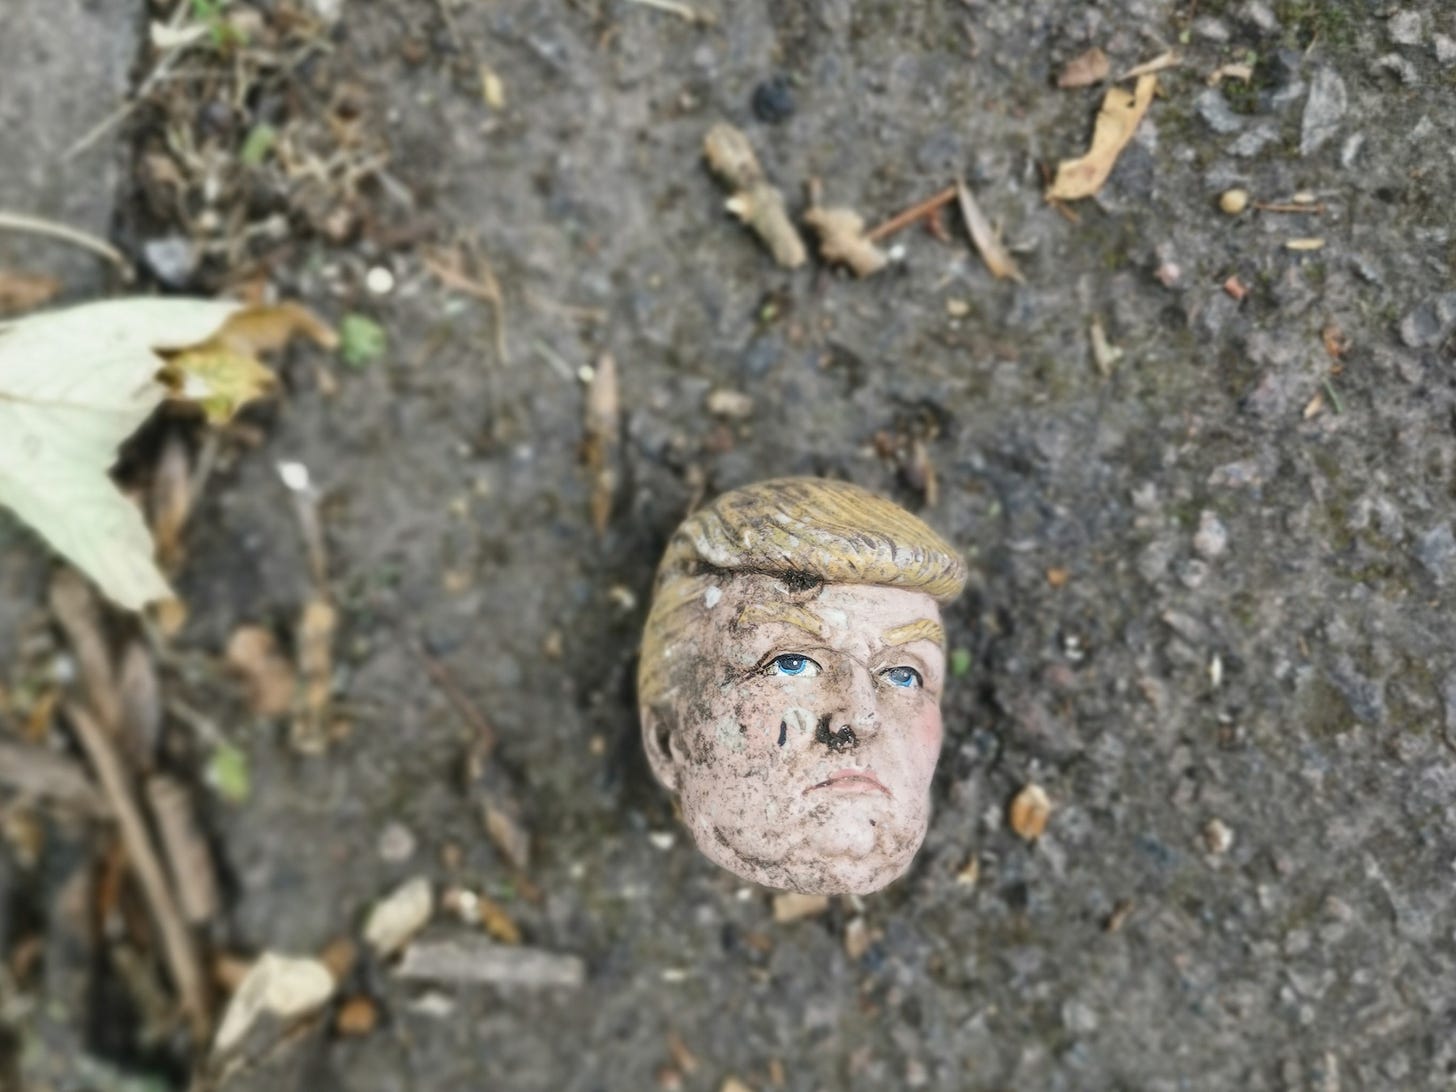 A pin of Trump's face on the ground. Max Letek / Unsplash